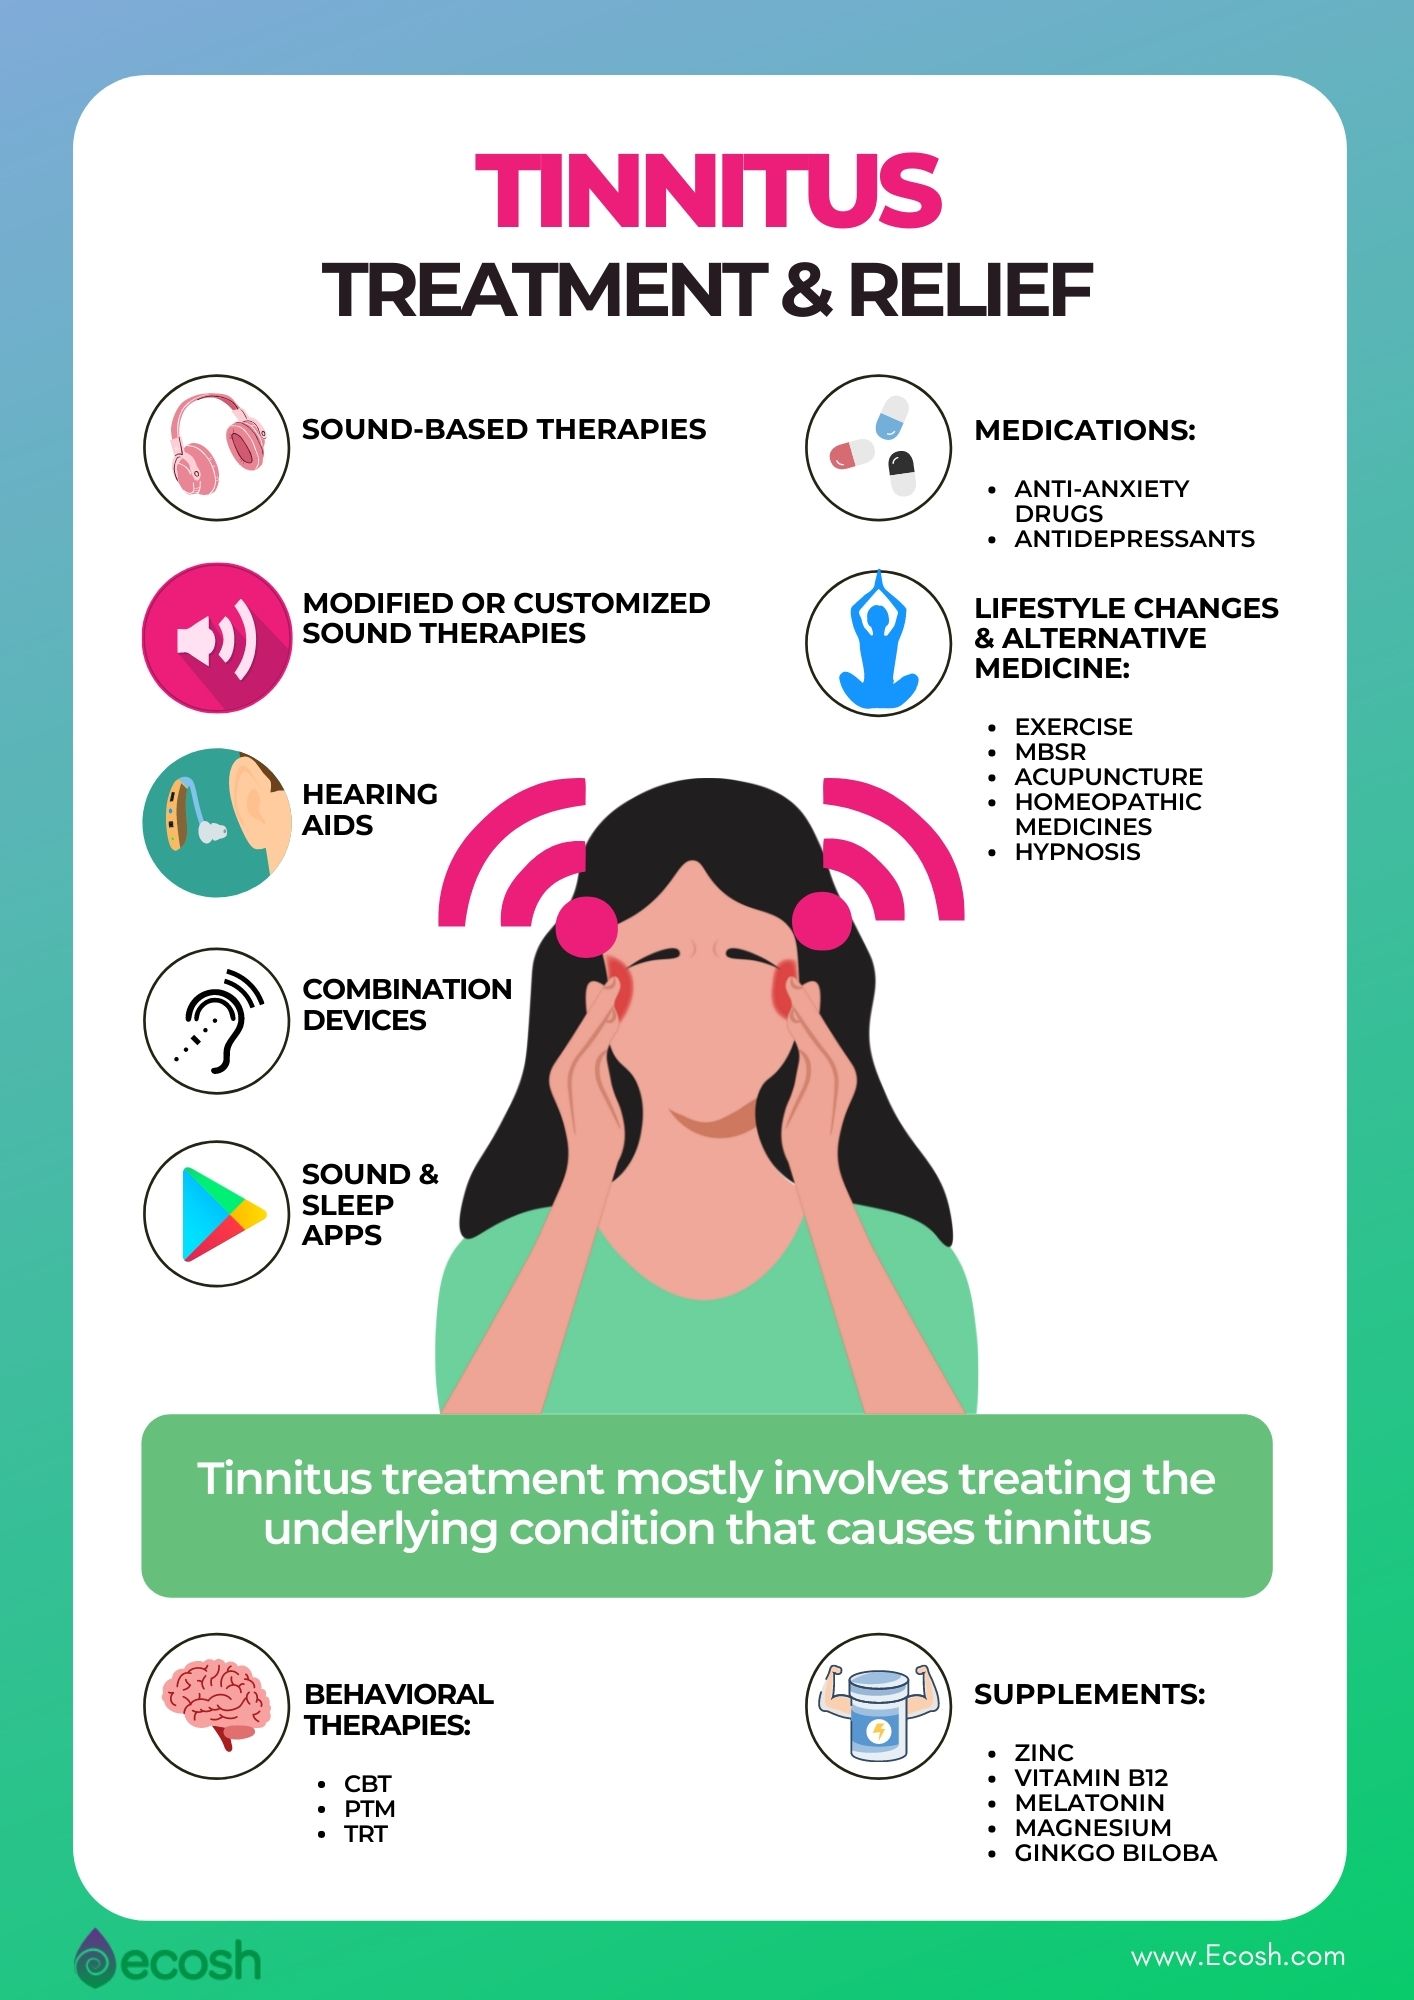 Ecosh_Tinnitus_Treatment_And_Relief